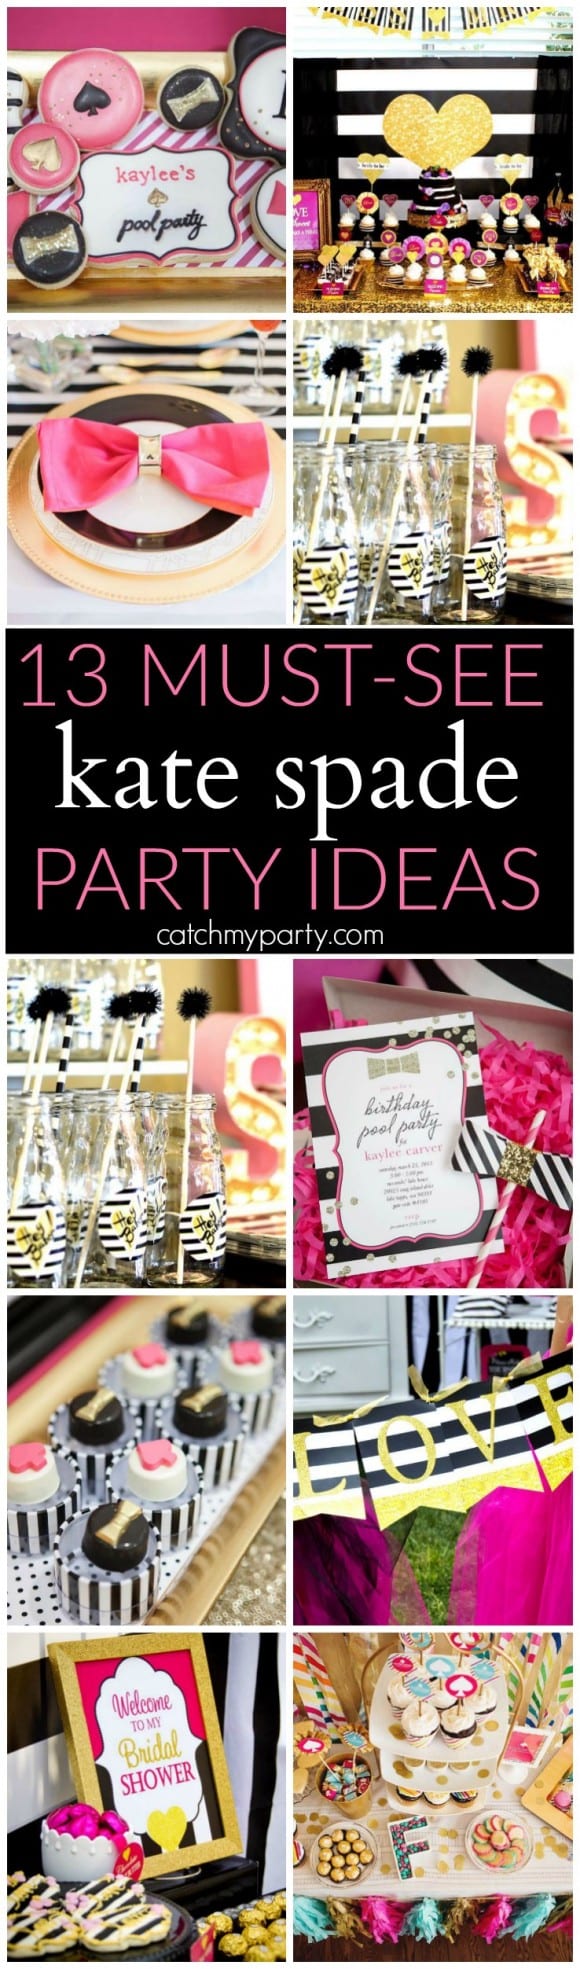 Kate Spade party ideas | Catchmyparty.com